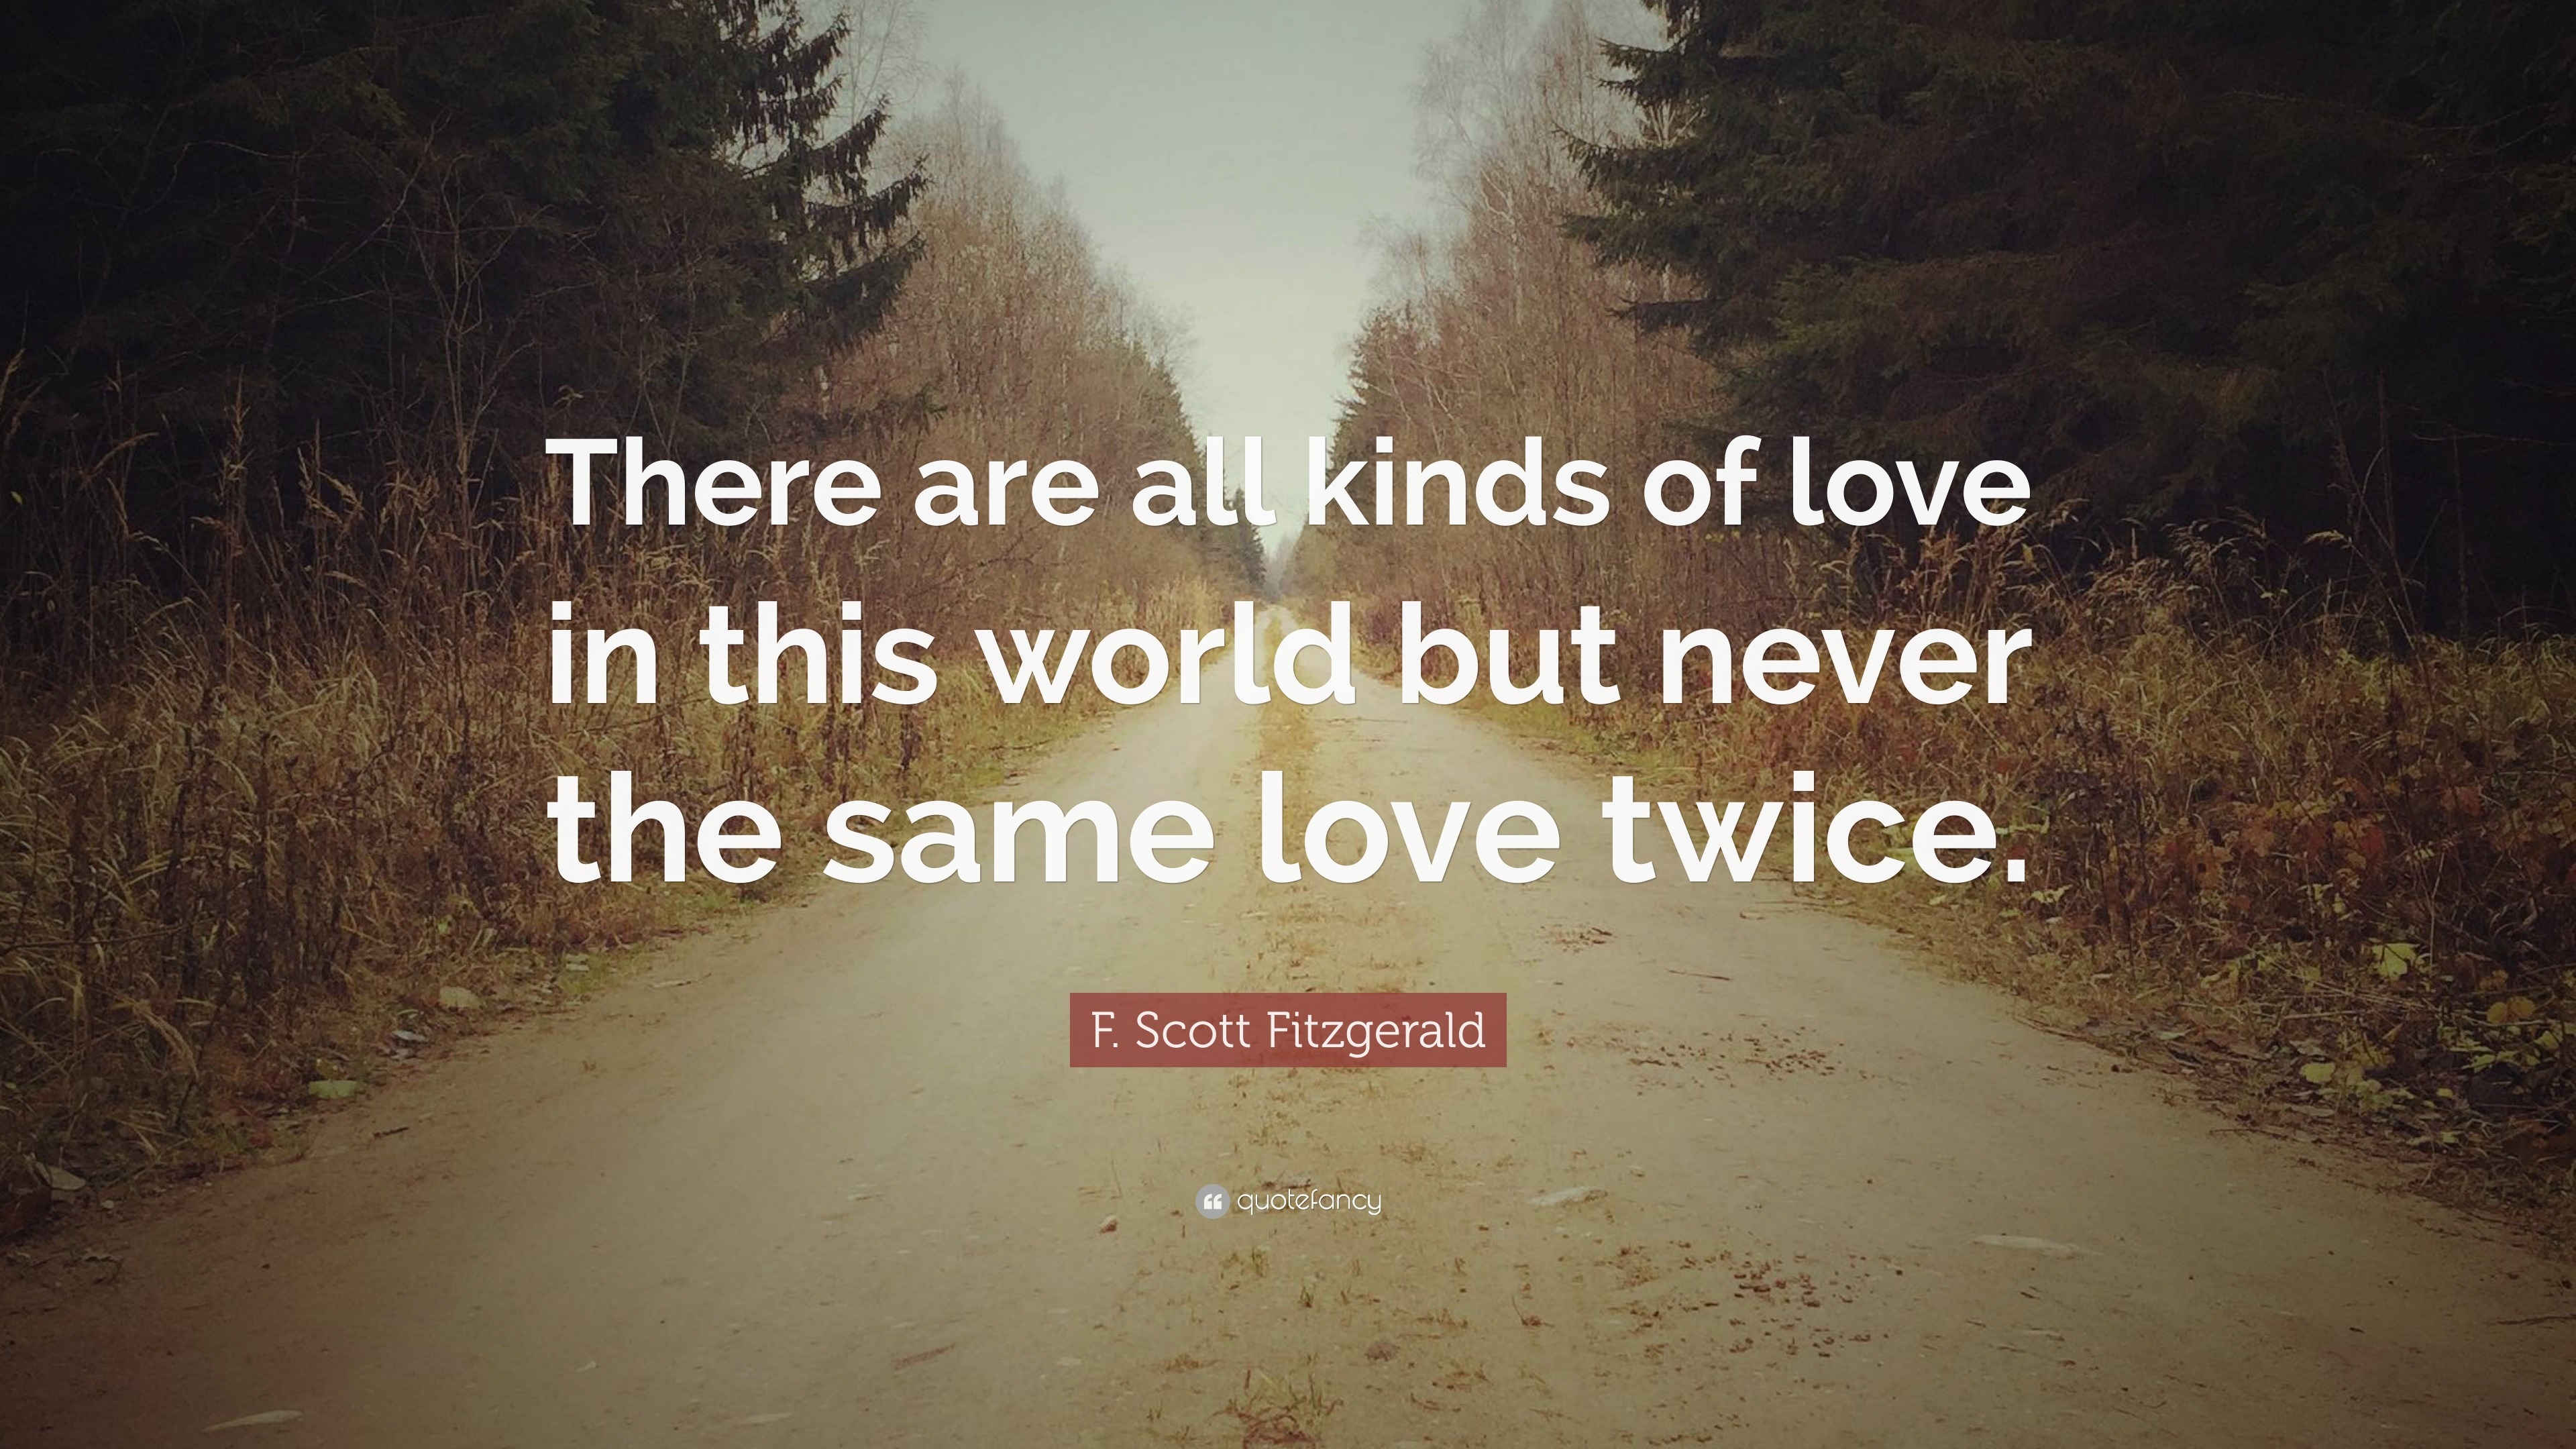 F Scott Fitzgerald Quote “There are all kinds of love in this world